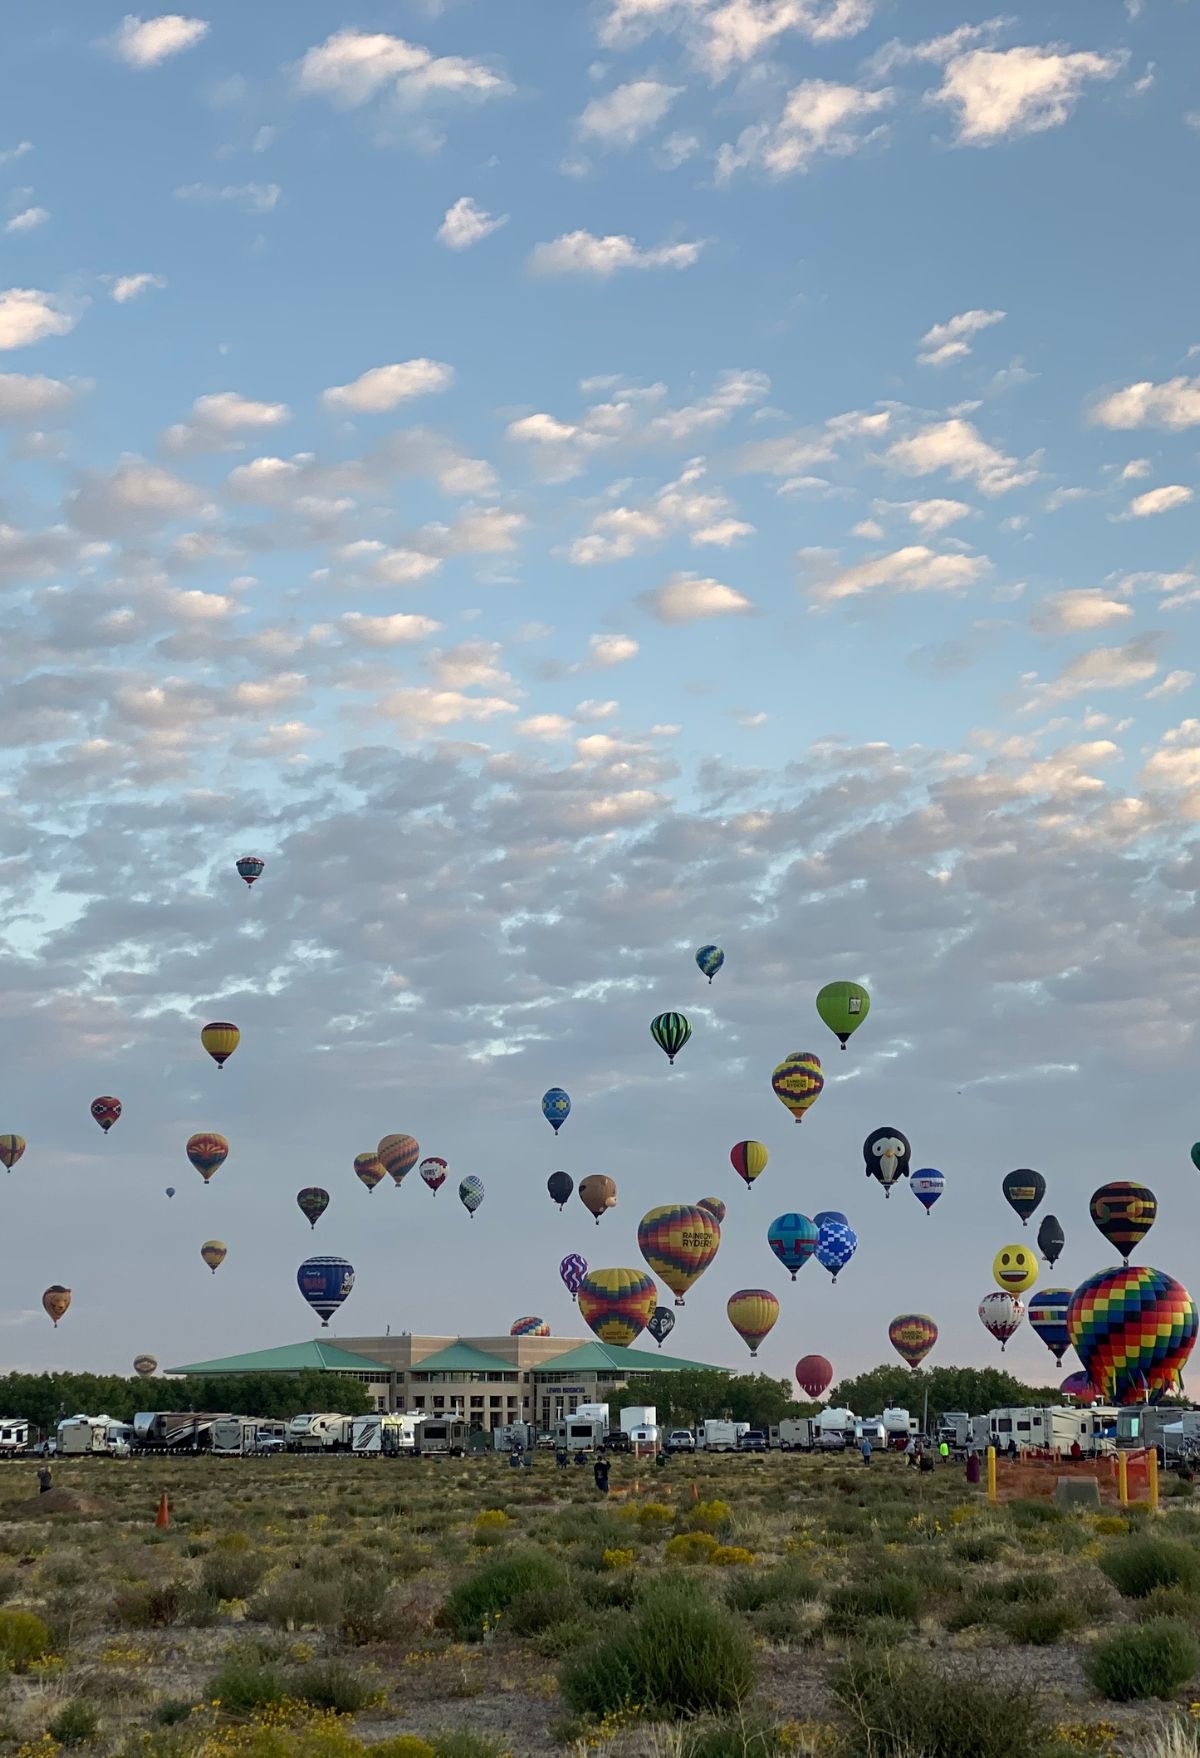 Many hot air balloons flying in the sky at Albuquerque.